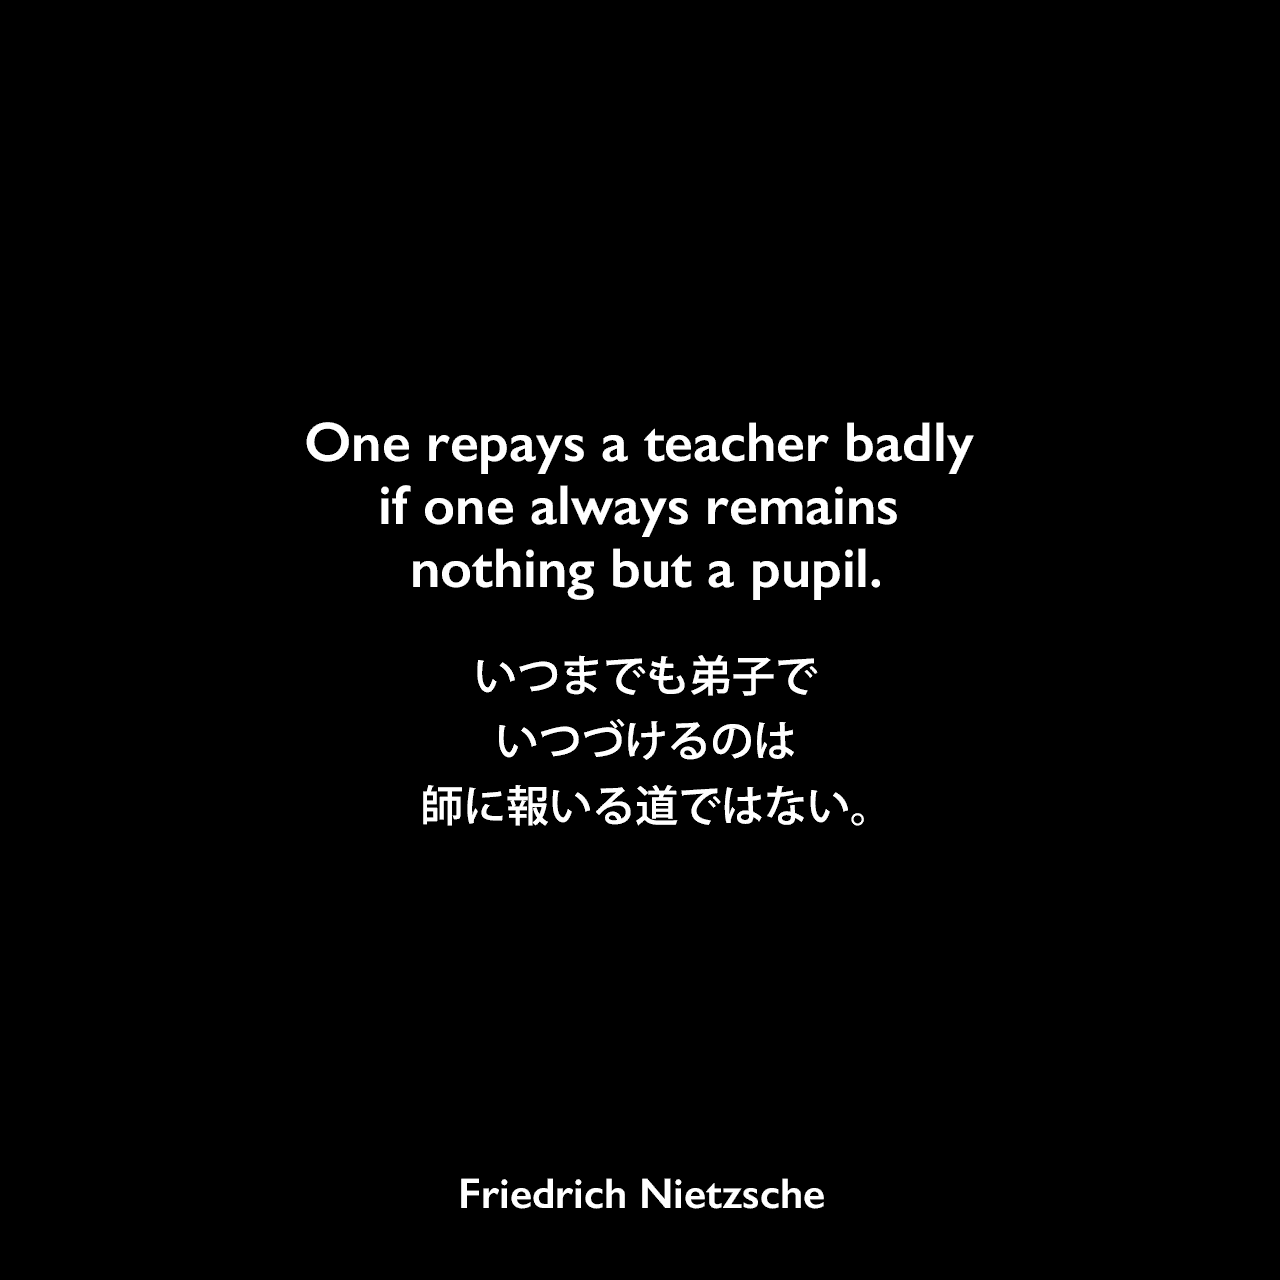 One repays a teacher badly if one always remains nothing but a pupil.いつまでも弟子でいつづけるのは、師に報いる道ではない。- ニーチェの本「ツァラトゥストラはこう語った」よりFriedrich Nietzsche